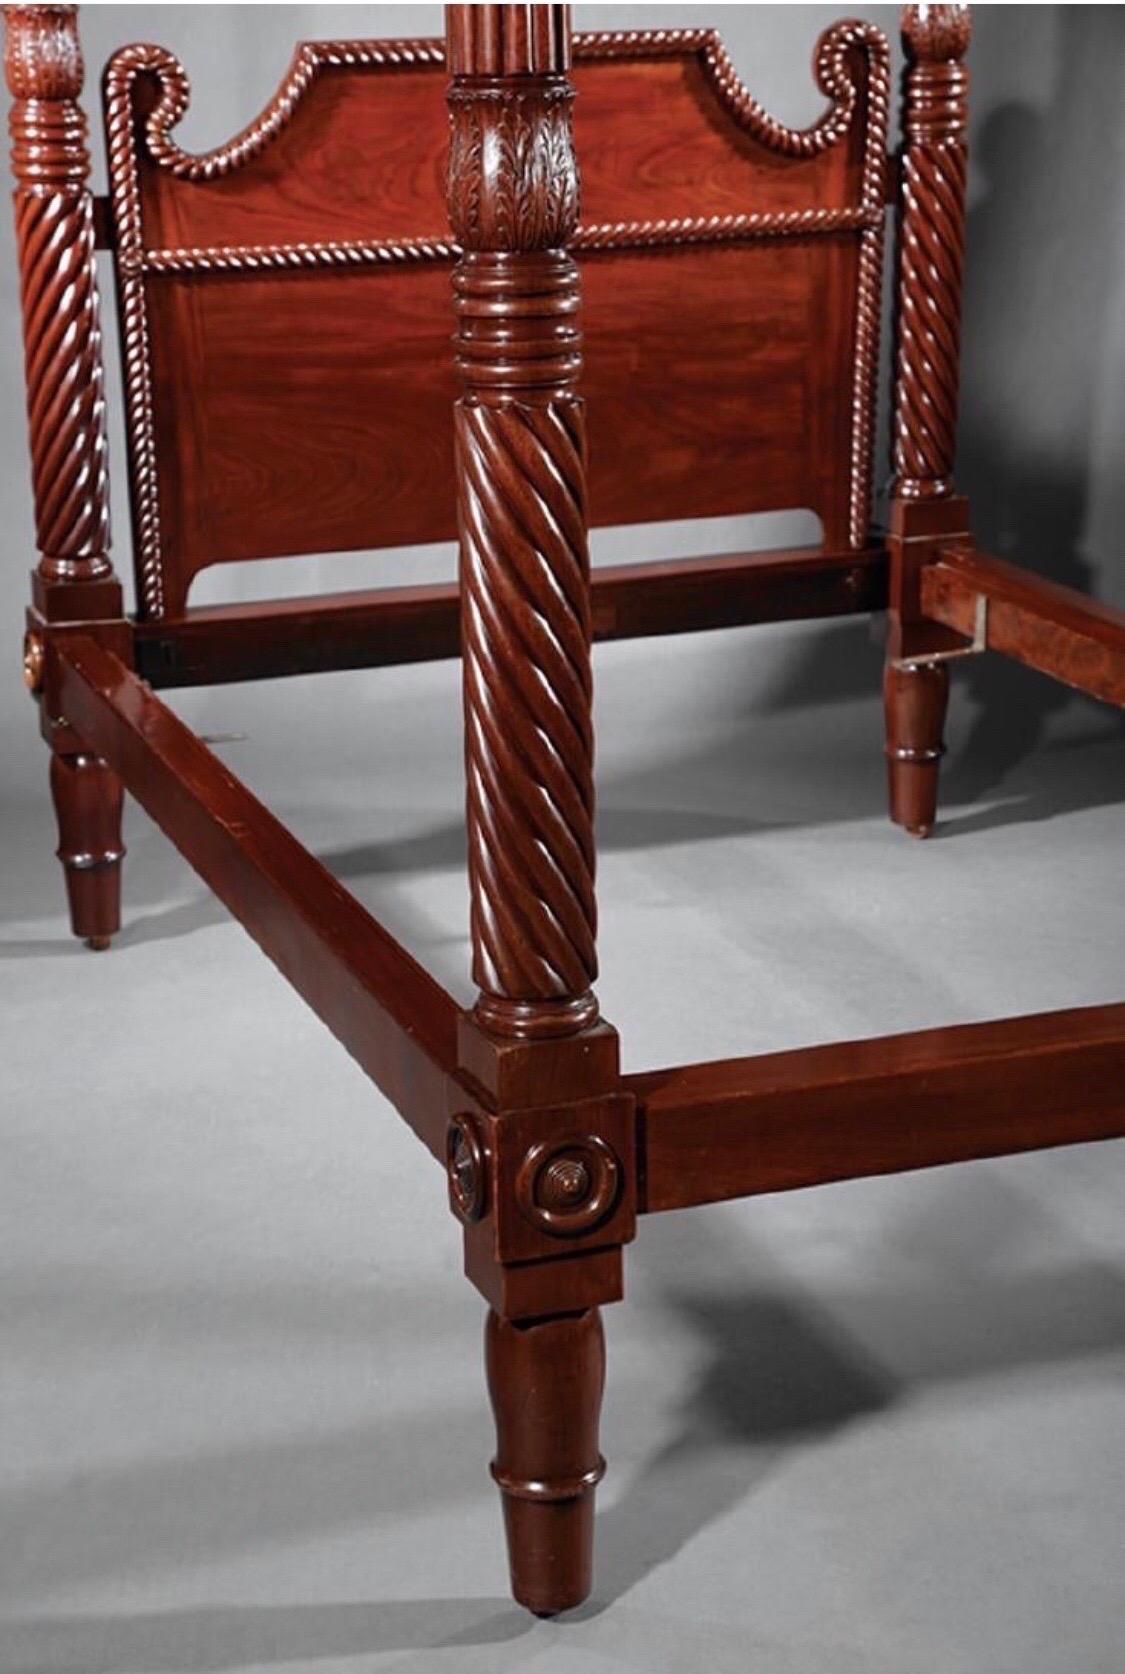 19th century West Indies carved mahogany 4 post bed with acanthus-carved reeded and spiral-turned posts, melon finials, rope-molded paneled headboard, tall turned feet.
         